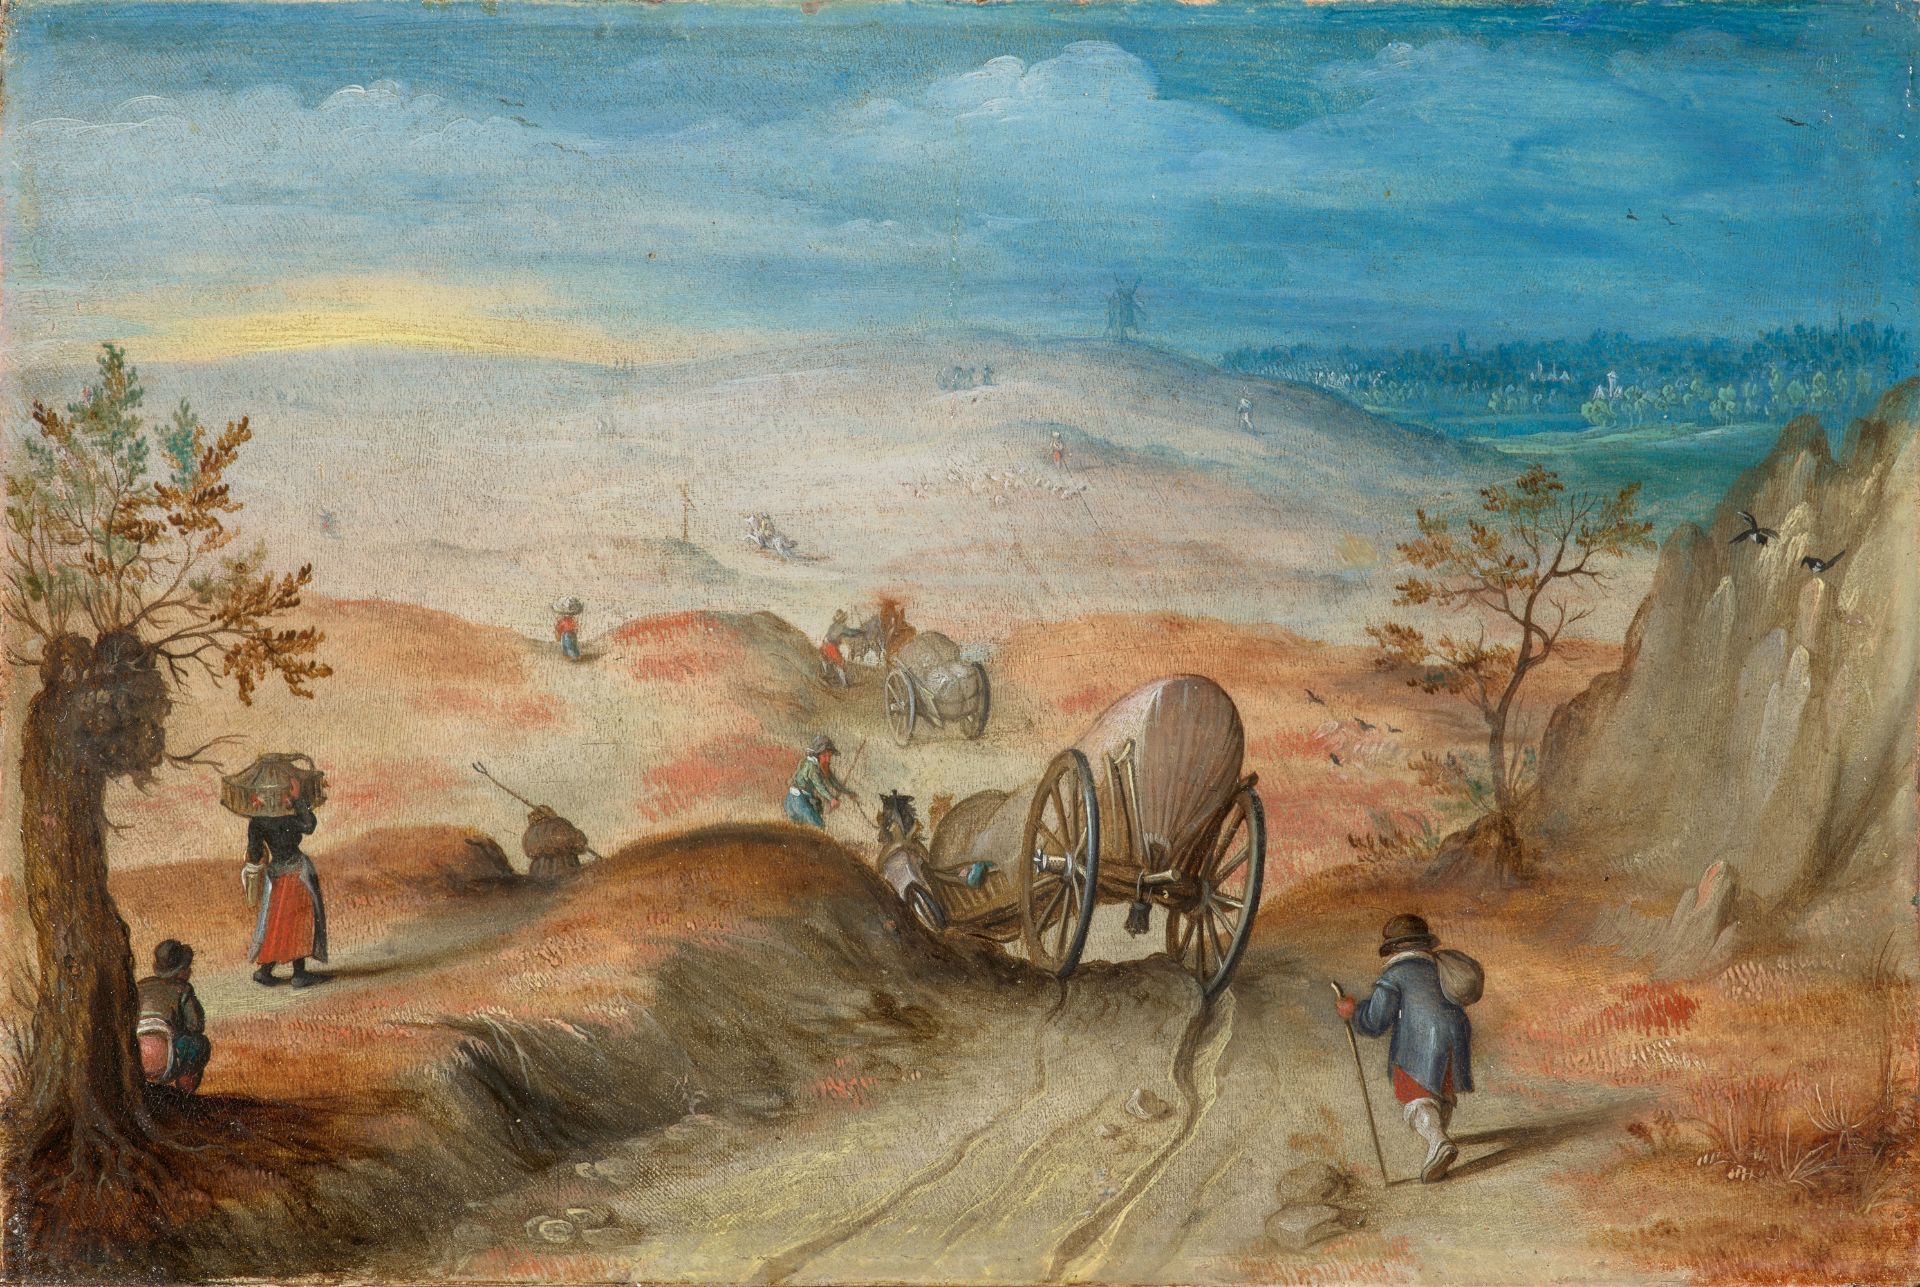 Flemish School early 17th century, Hilly Landscape with Carts and Peasants on a Sandy Path